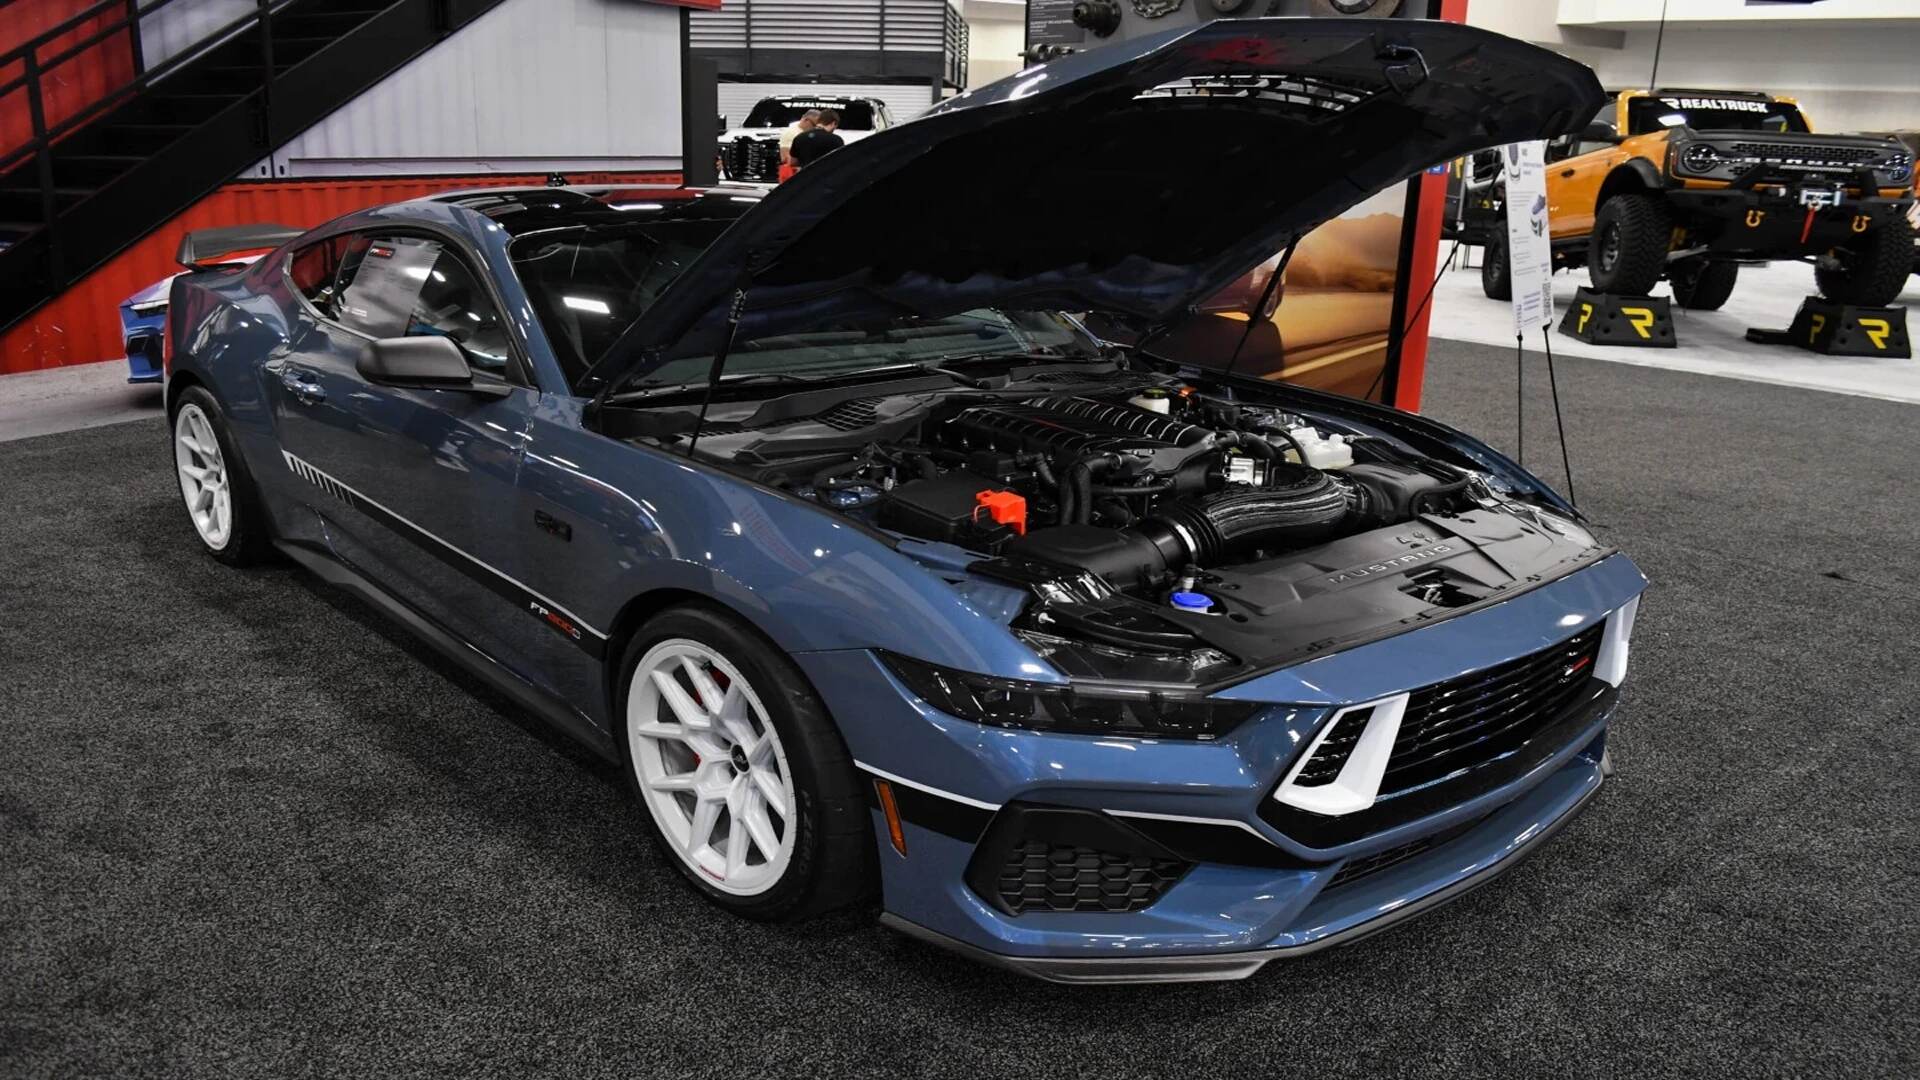 A Ford Mustang Darkhorse Equipped With The Mustang FP800S Supercharger Kit (Credits Ford Muscle)